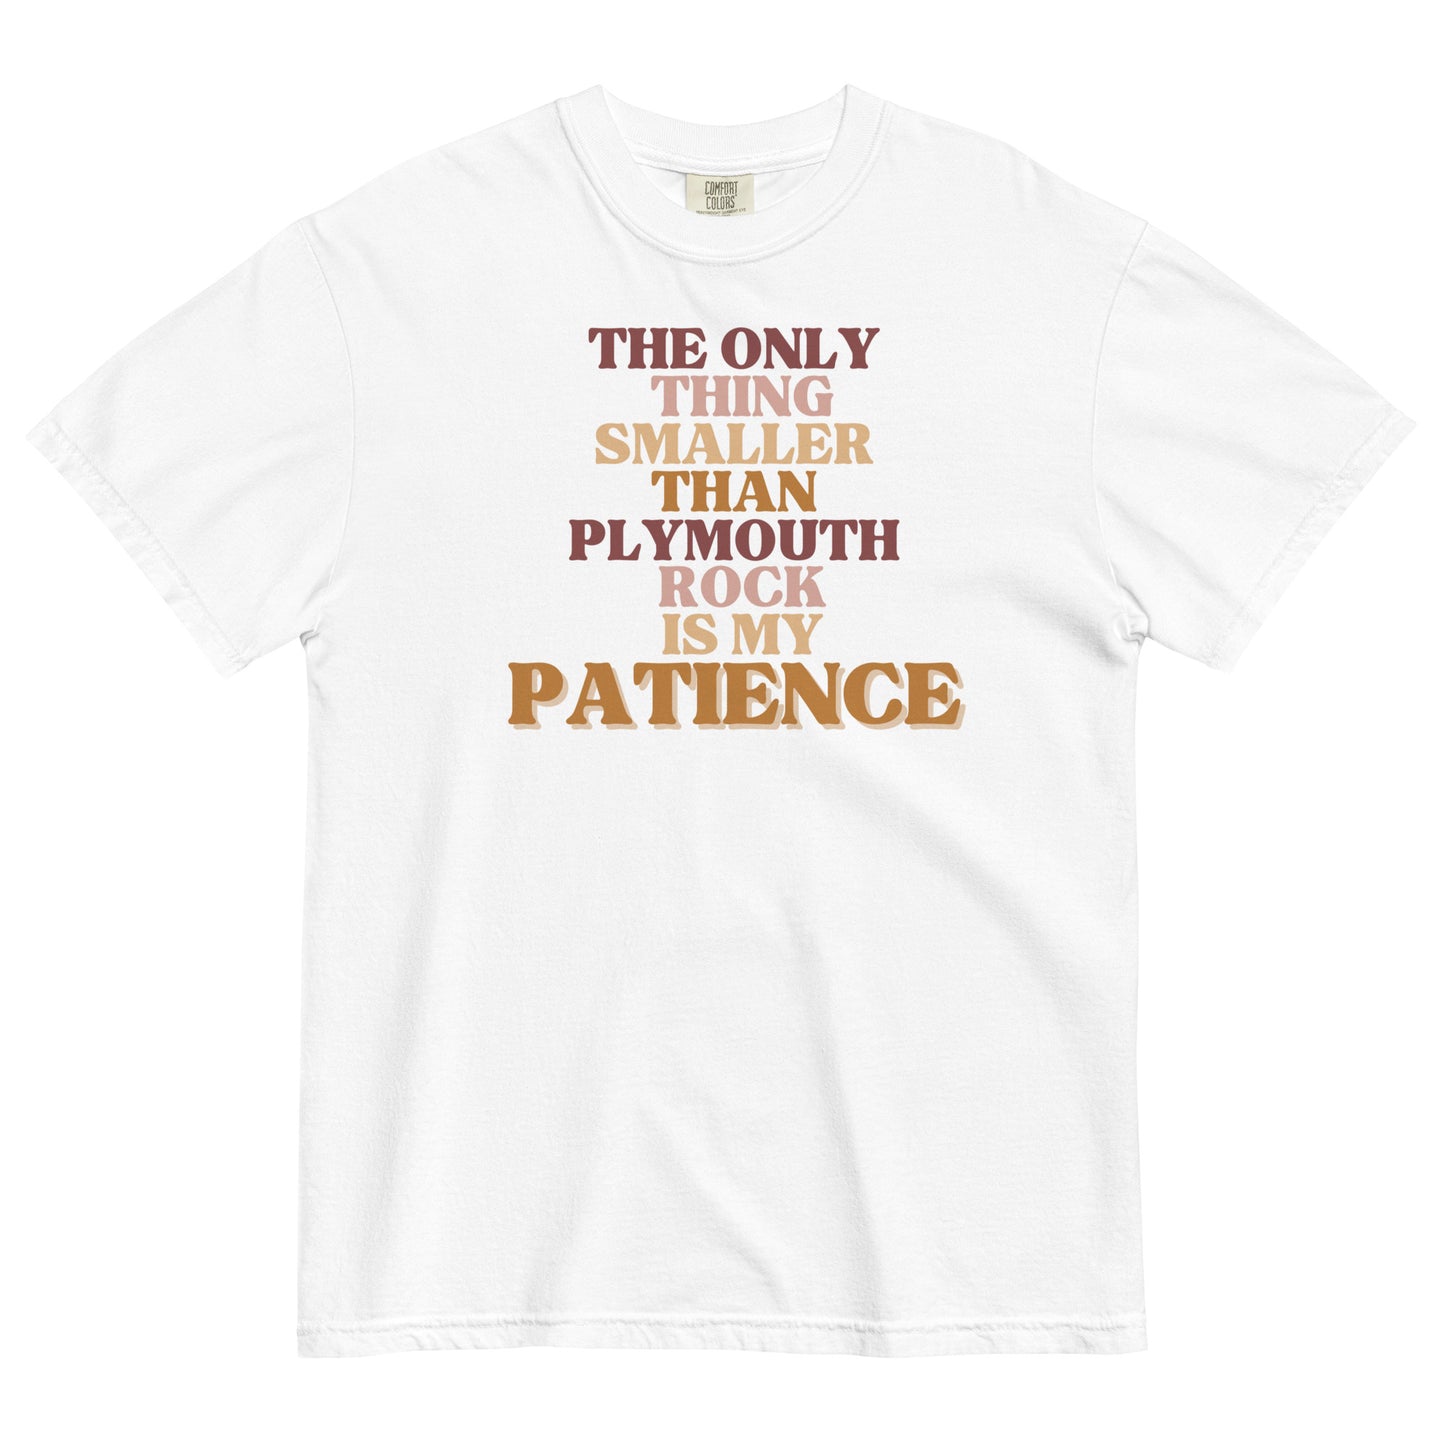 Plymouth Rock Patience T-Shirt